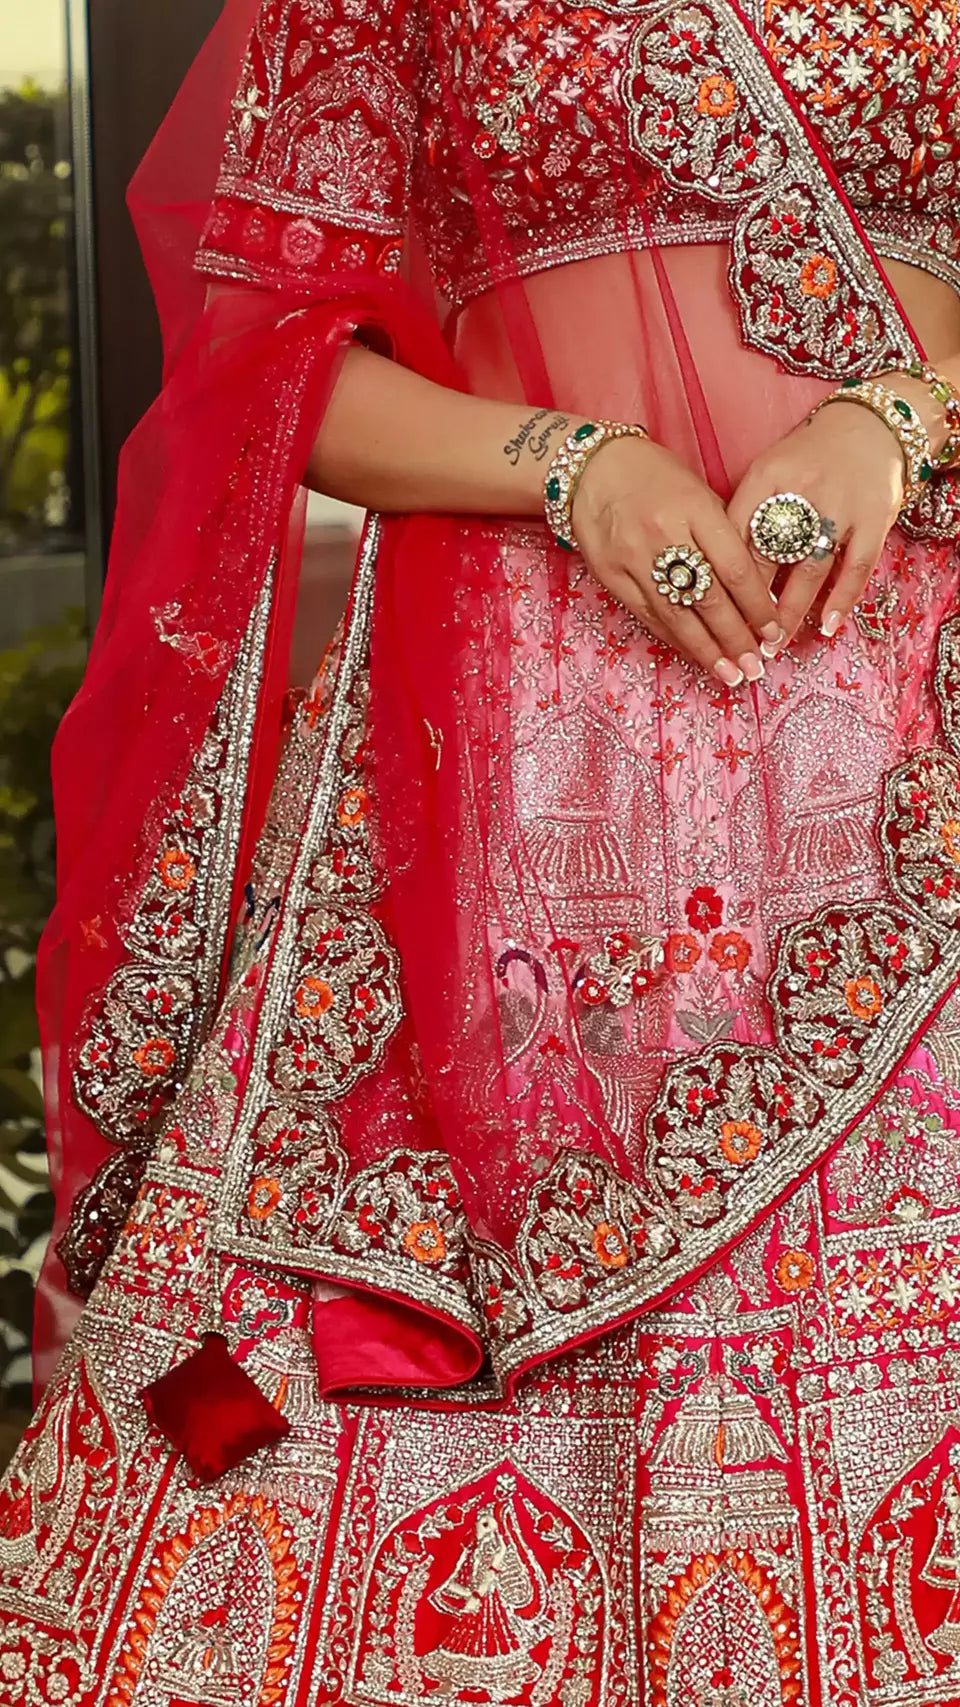 Find Your Match! We've Got 10 Designer Lehengas for Wedding Receptions  That'll Make You Look Stunning!